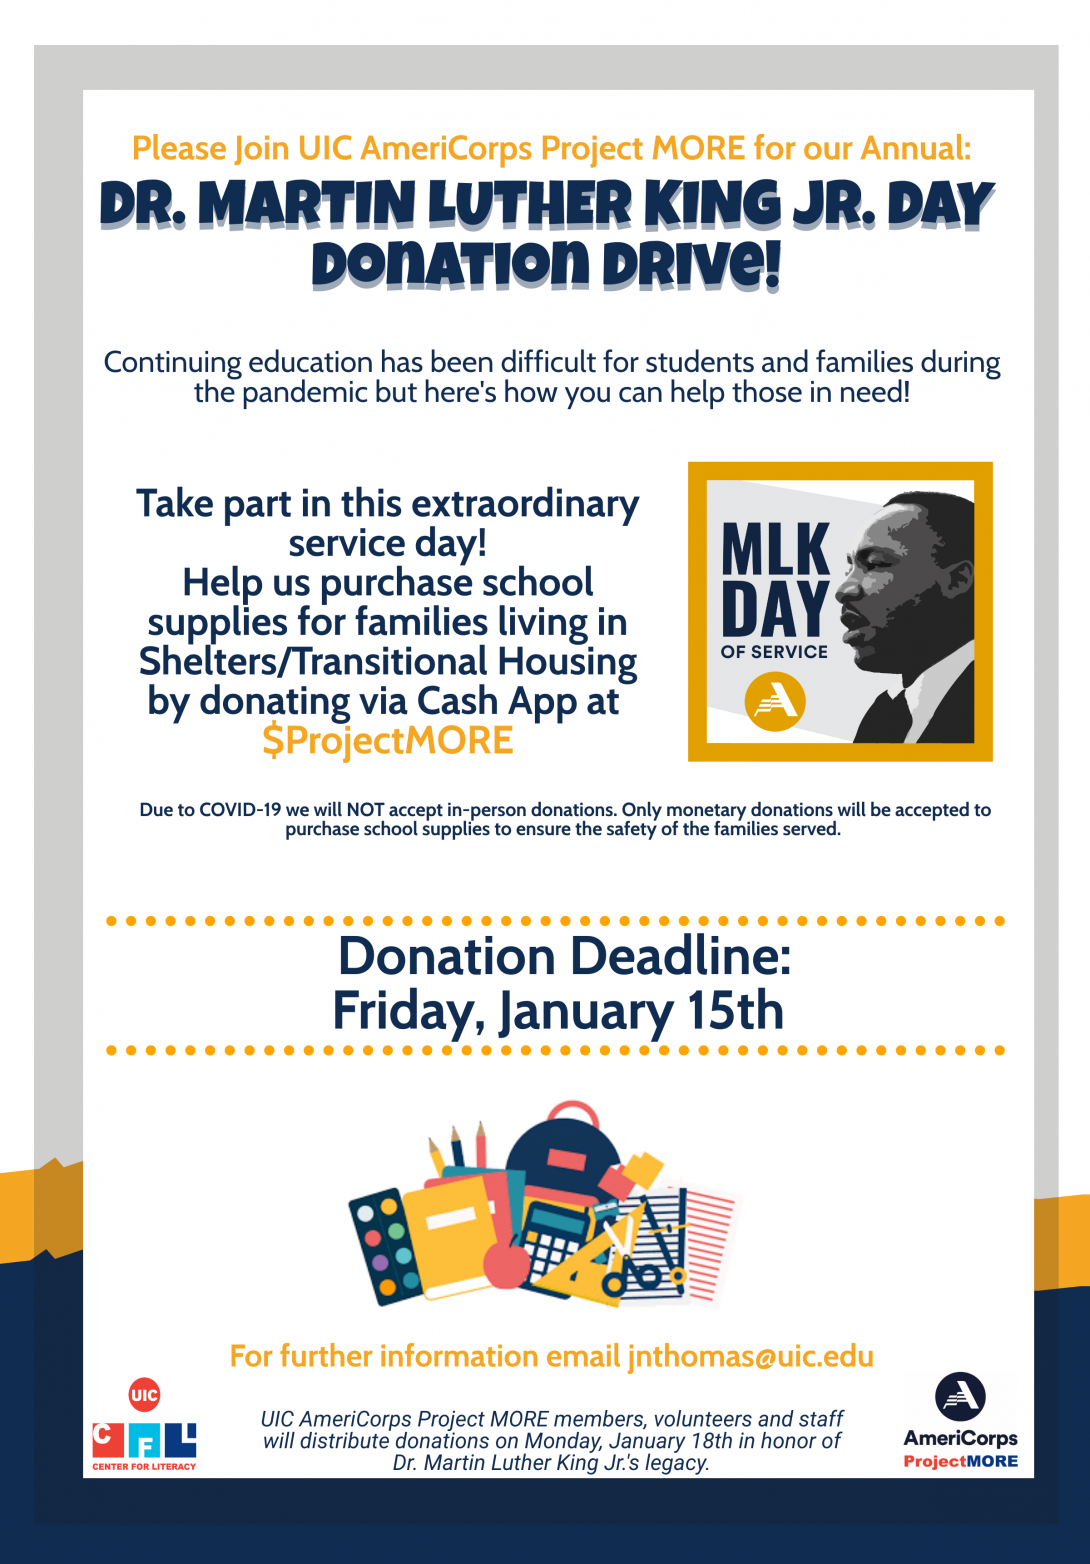 Dr. Martin Luther King Jr. Day Donation Drive.